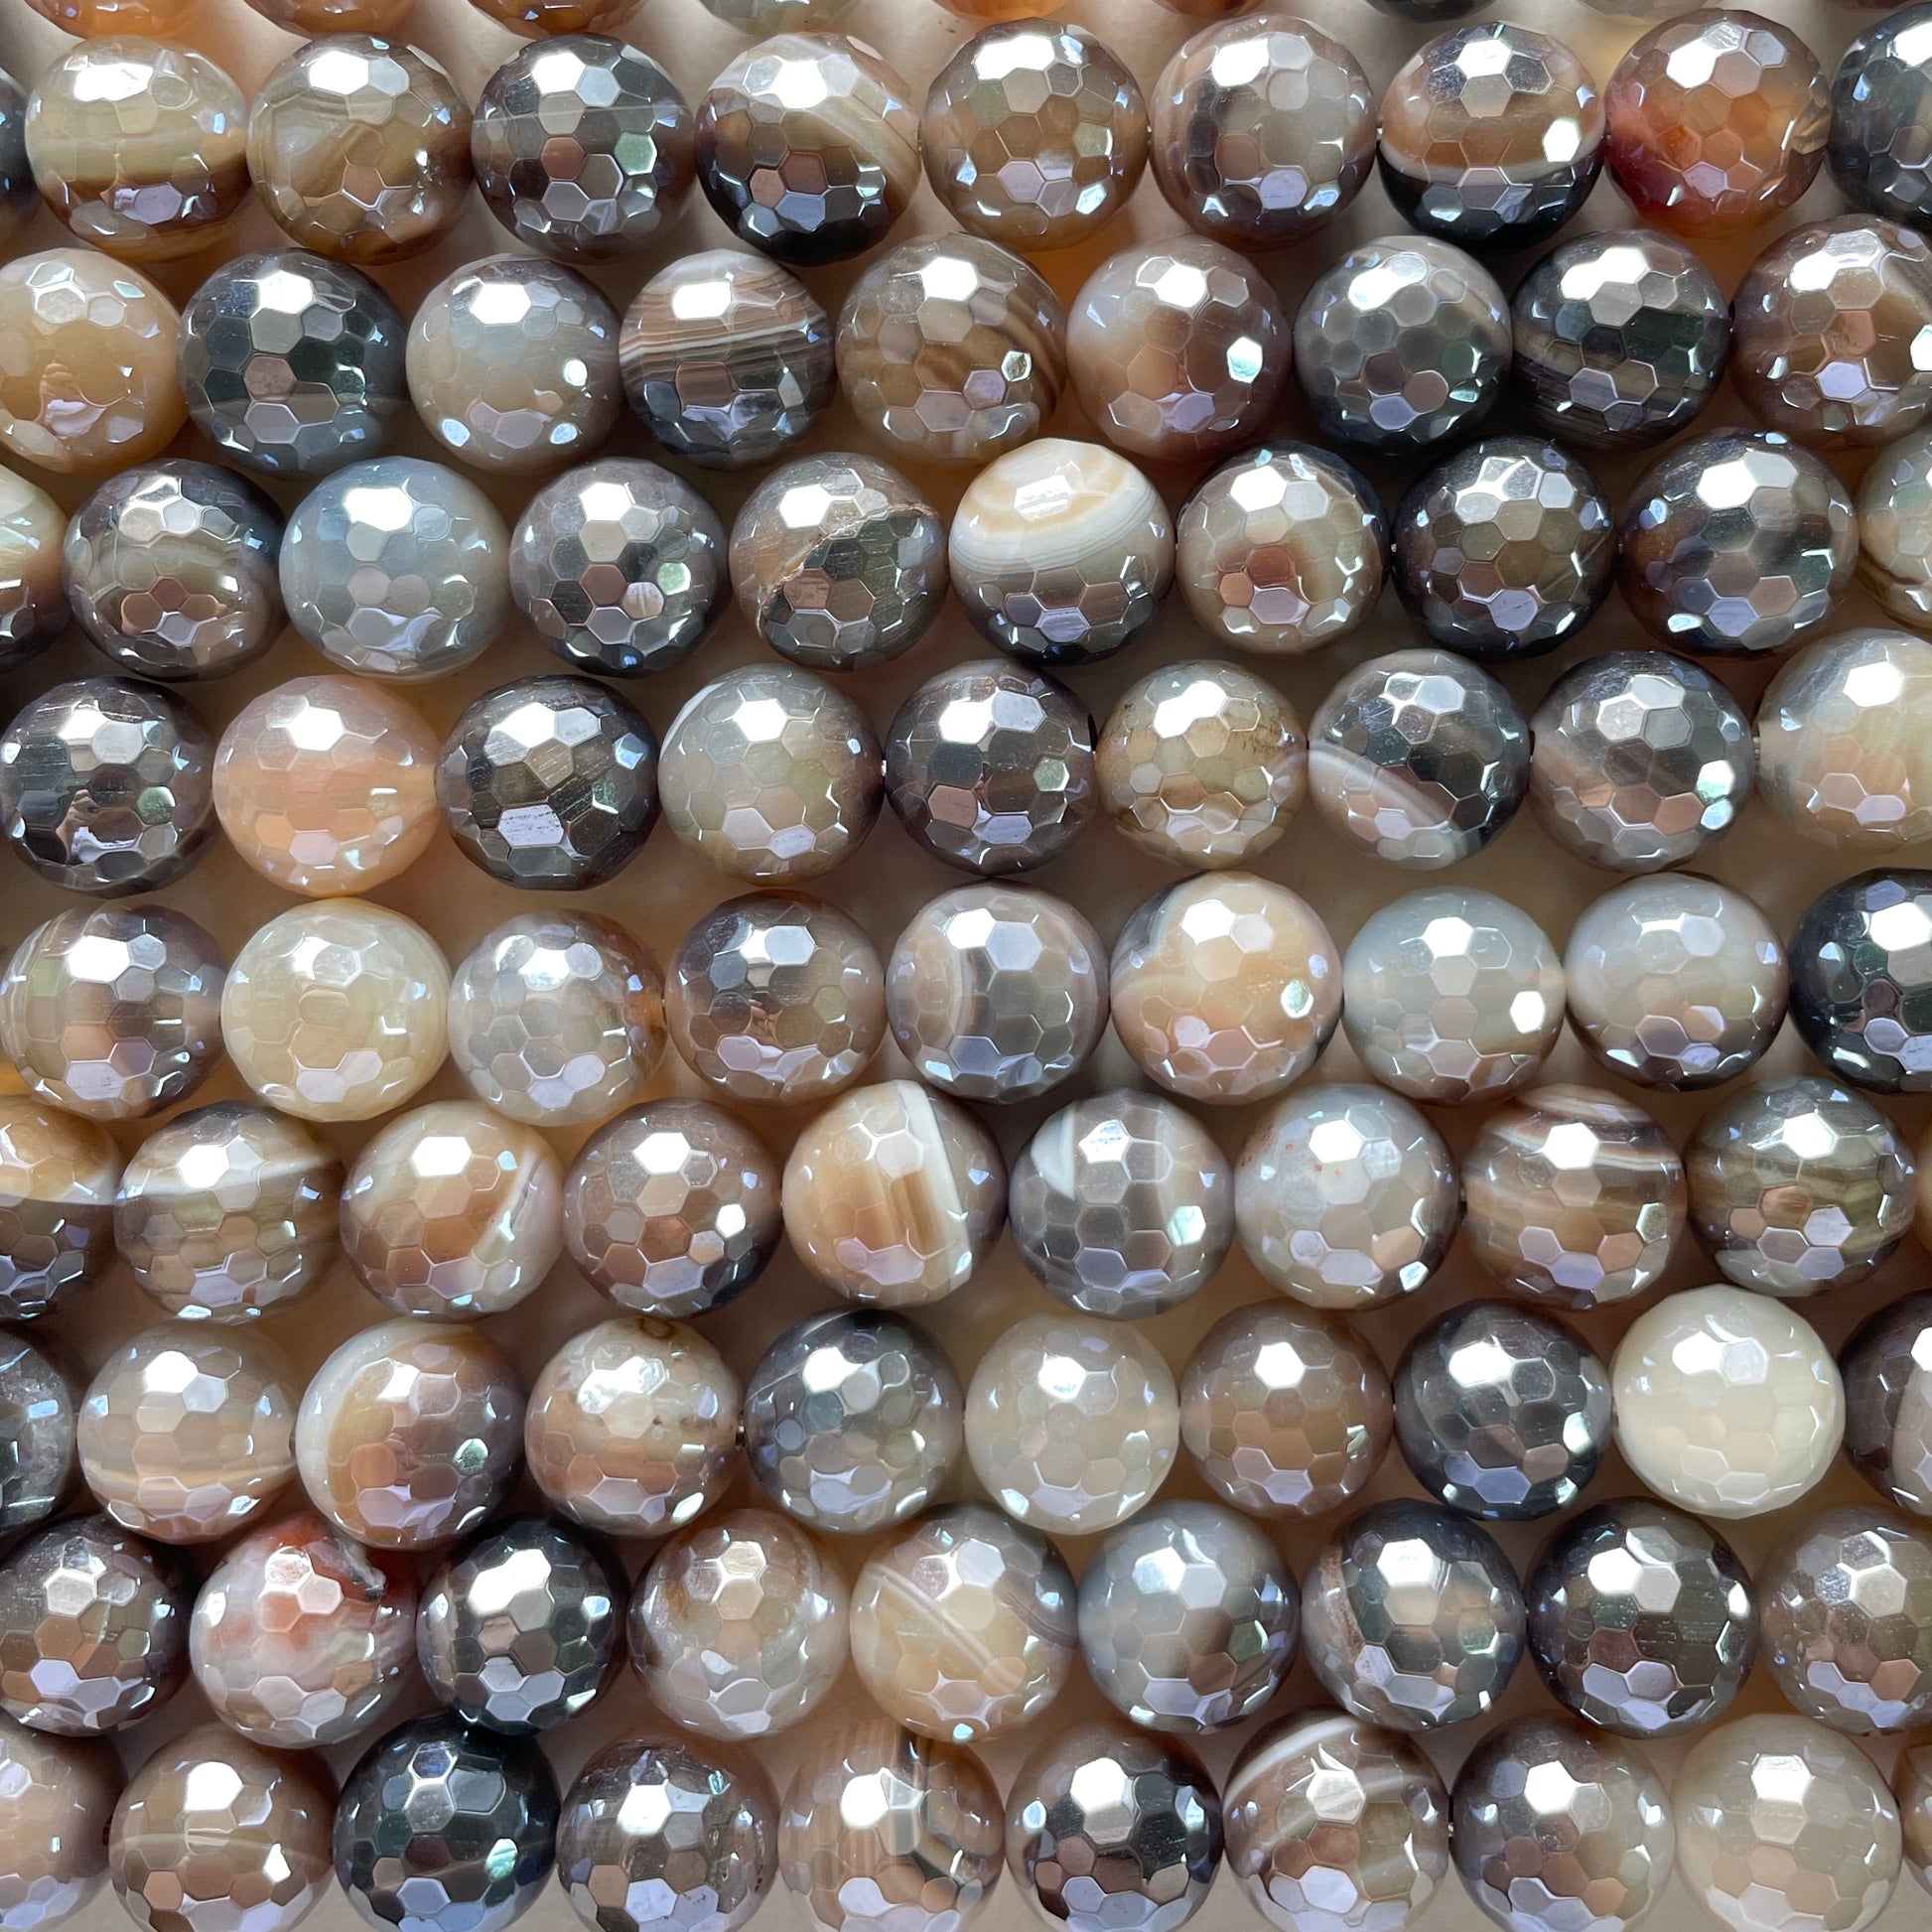 10, 12mm Electroplated Brown Banded Agate Stone Faceted Beads- Grade A Premium Quality Electroplated Beads 12mm Stone Beads New Beads Arrivals Premium Quality Agate Beads Charms Beads Beyond